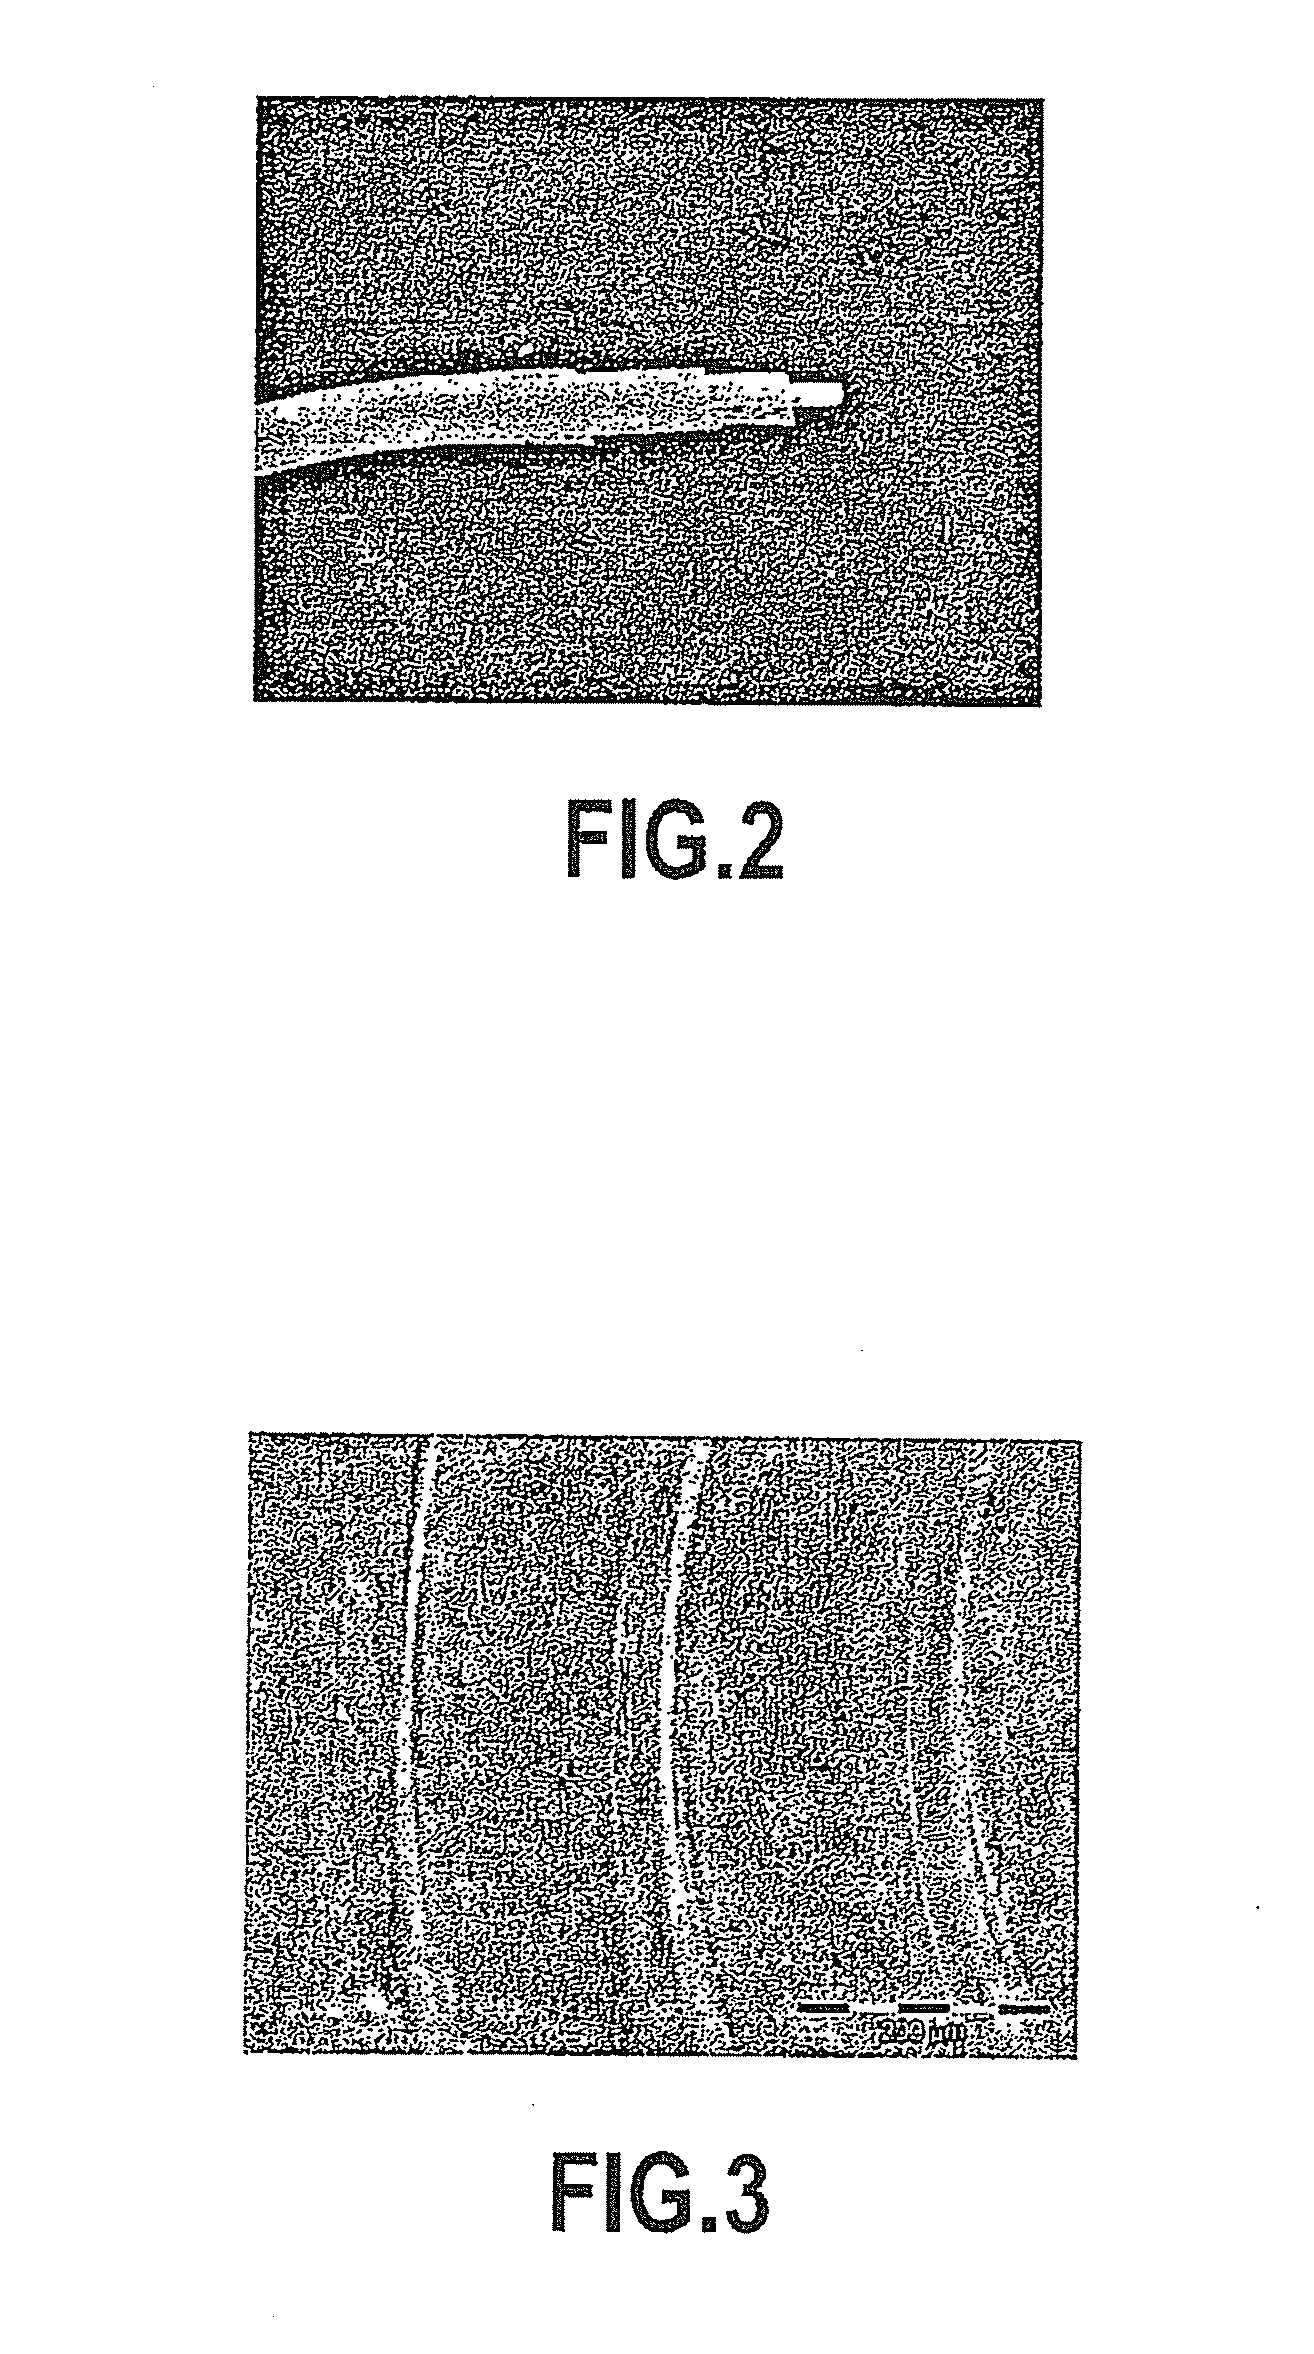 Hollow, notably multi-membrane fibers, method for preparation thereof by spinning and device for applying said method